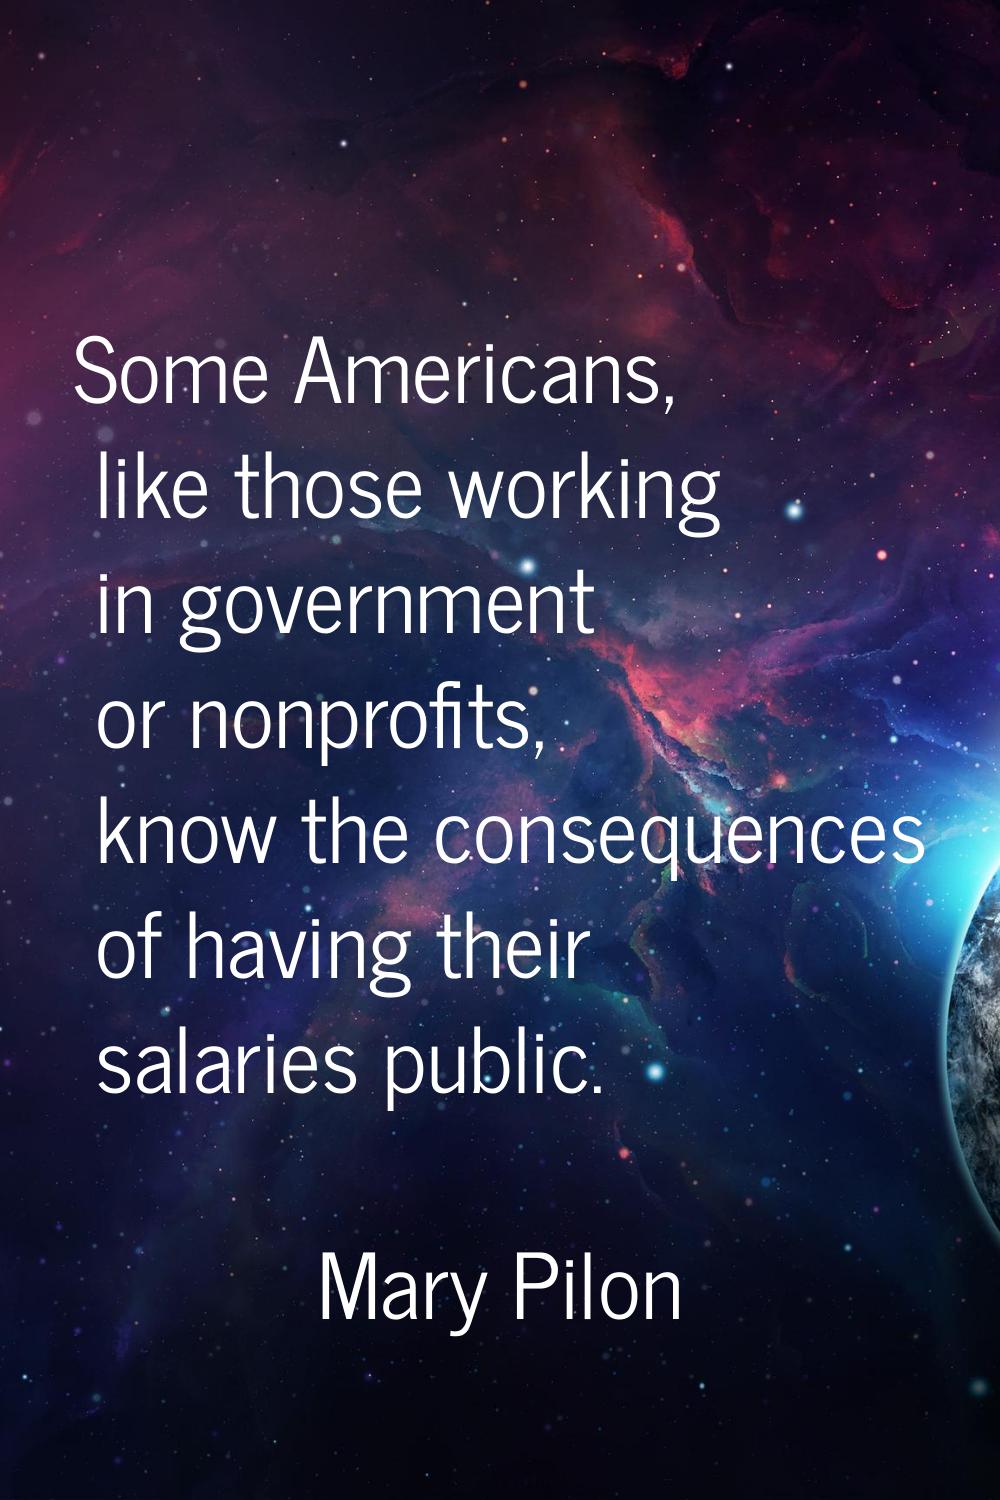 Some Americans, like those working in government or nonprofits, know the consequences of having the